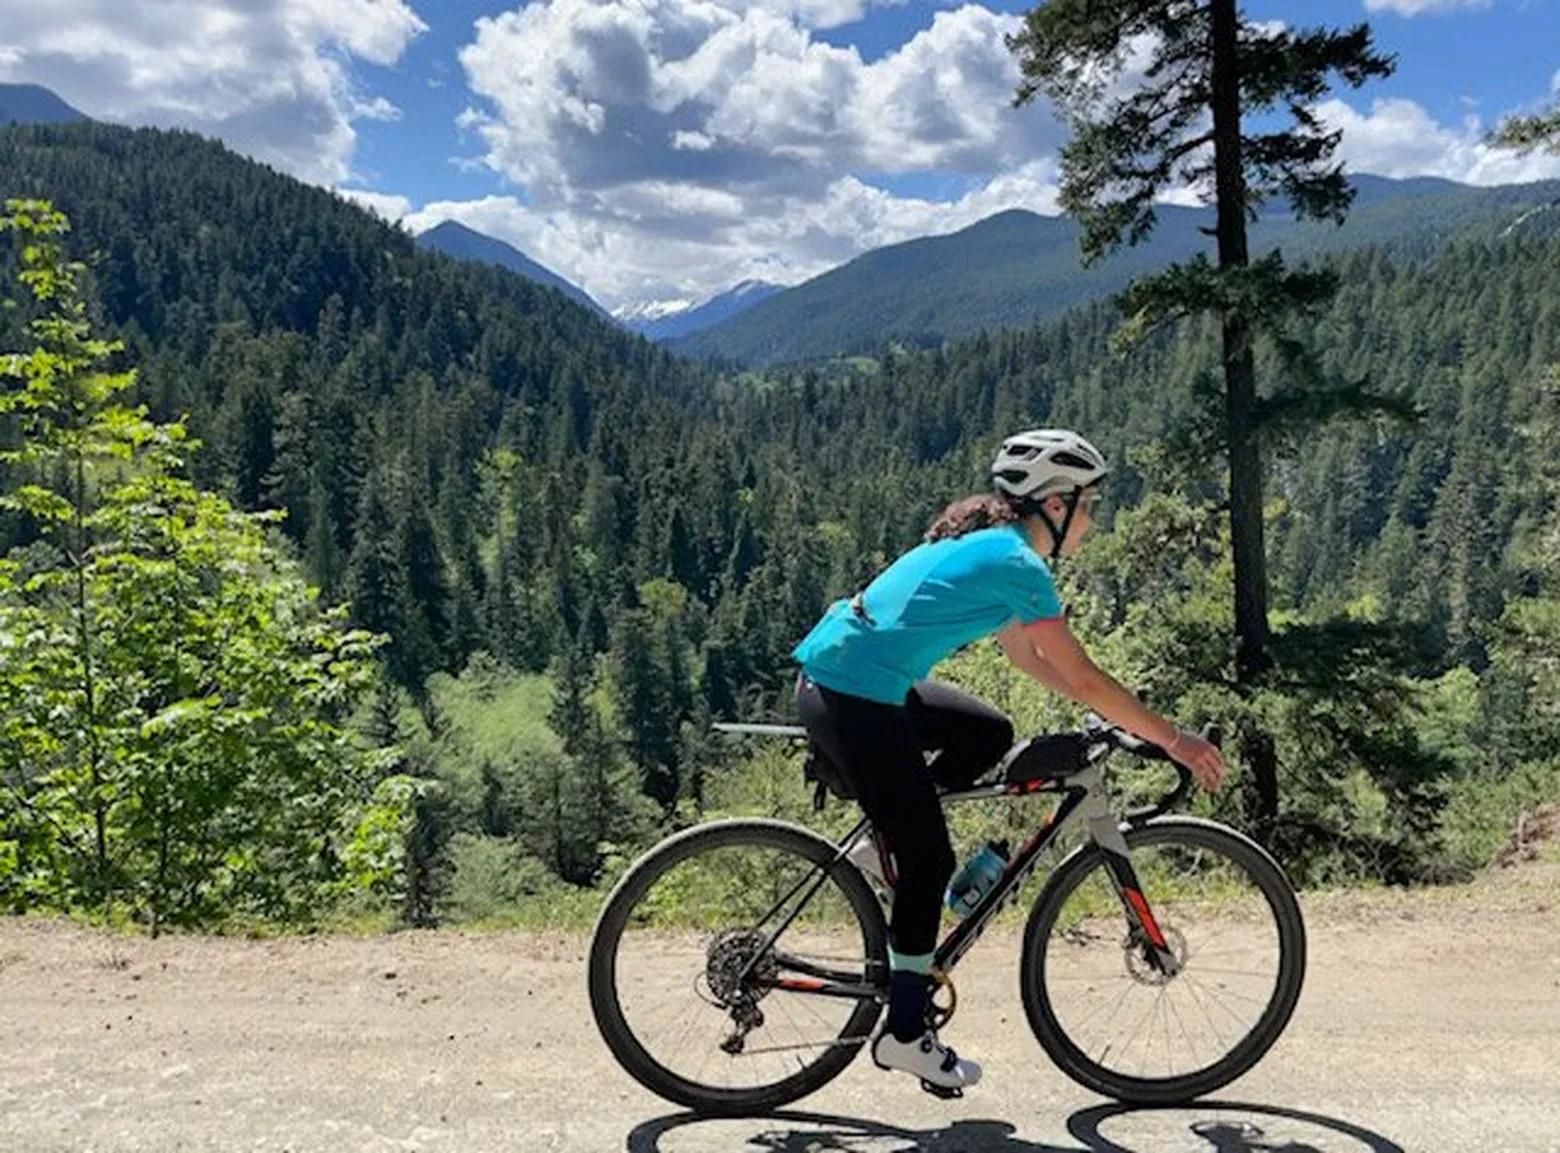 Participant in Northwest gravel cycling event